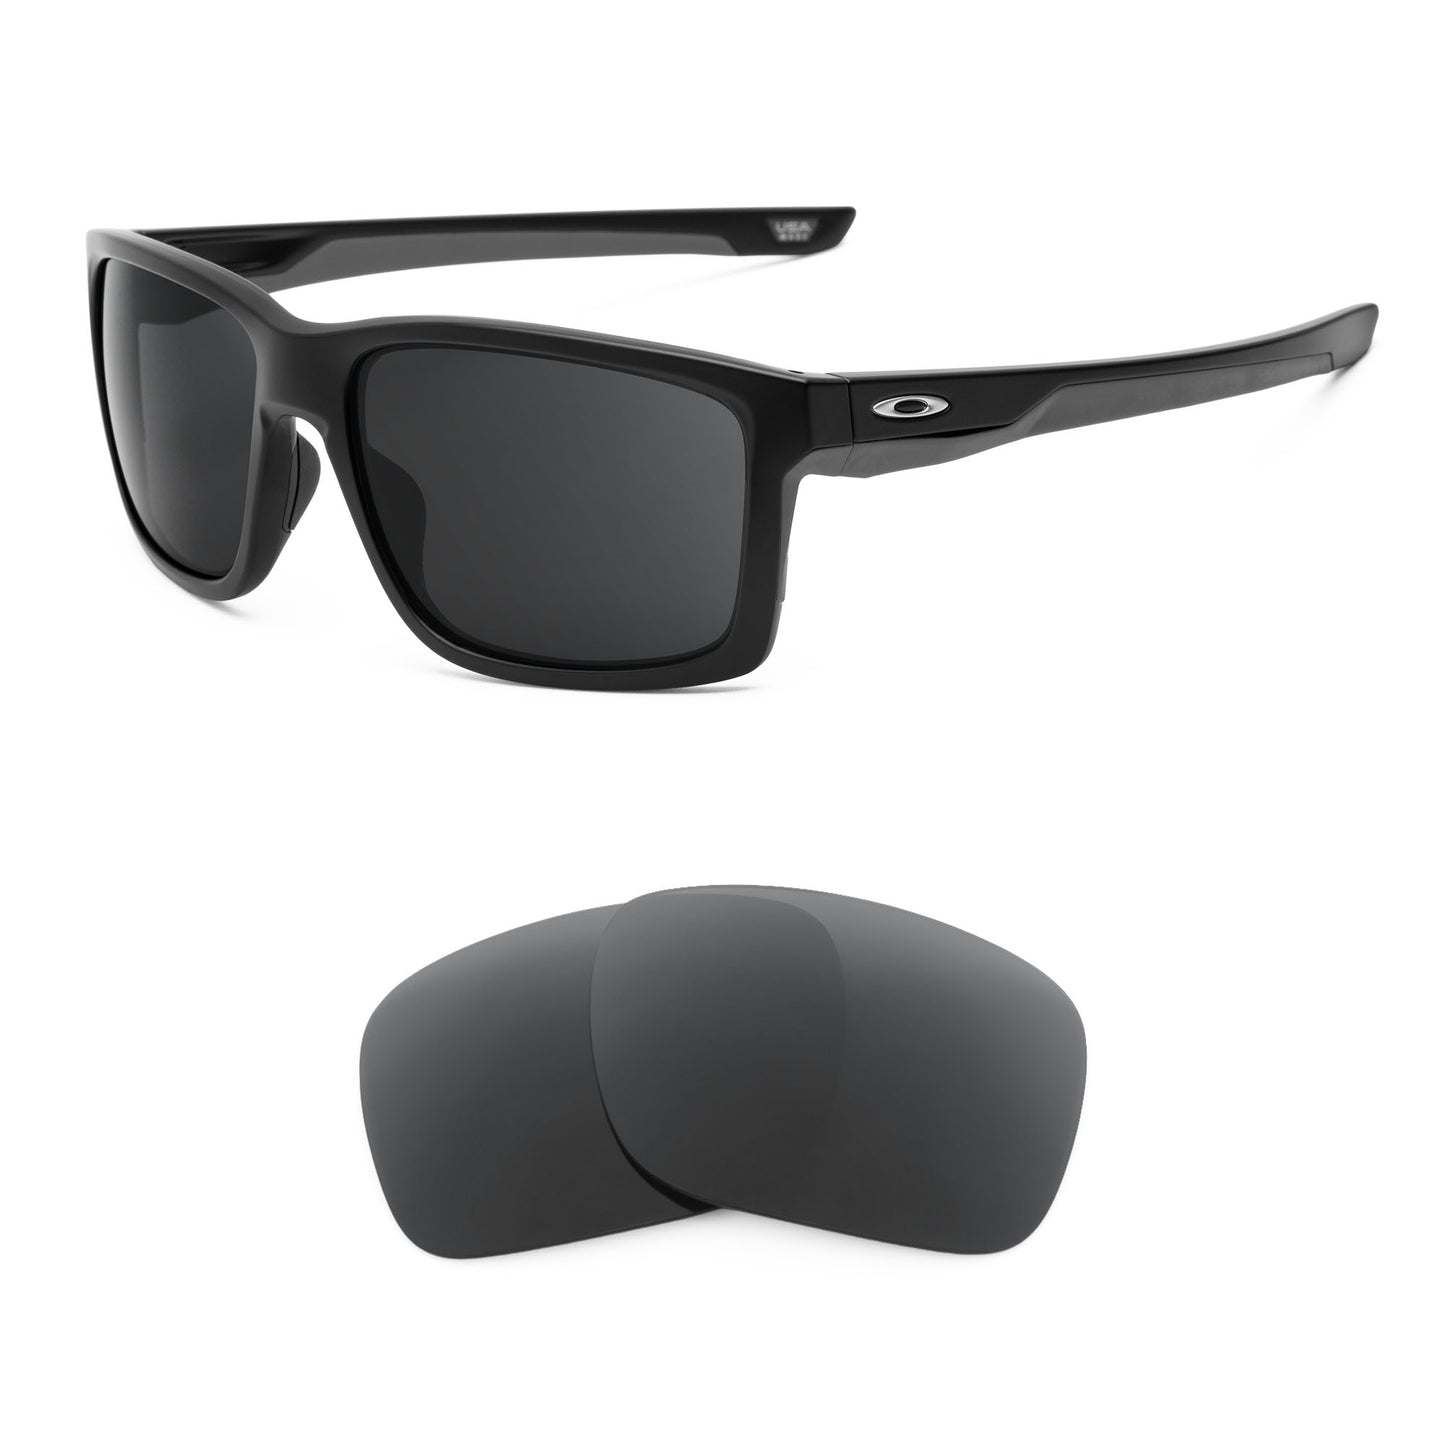 Oakley Mainlink XL sunglasses with replacement lenses